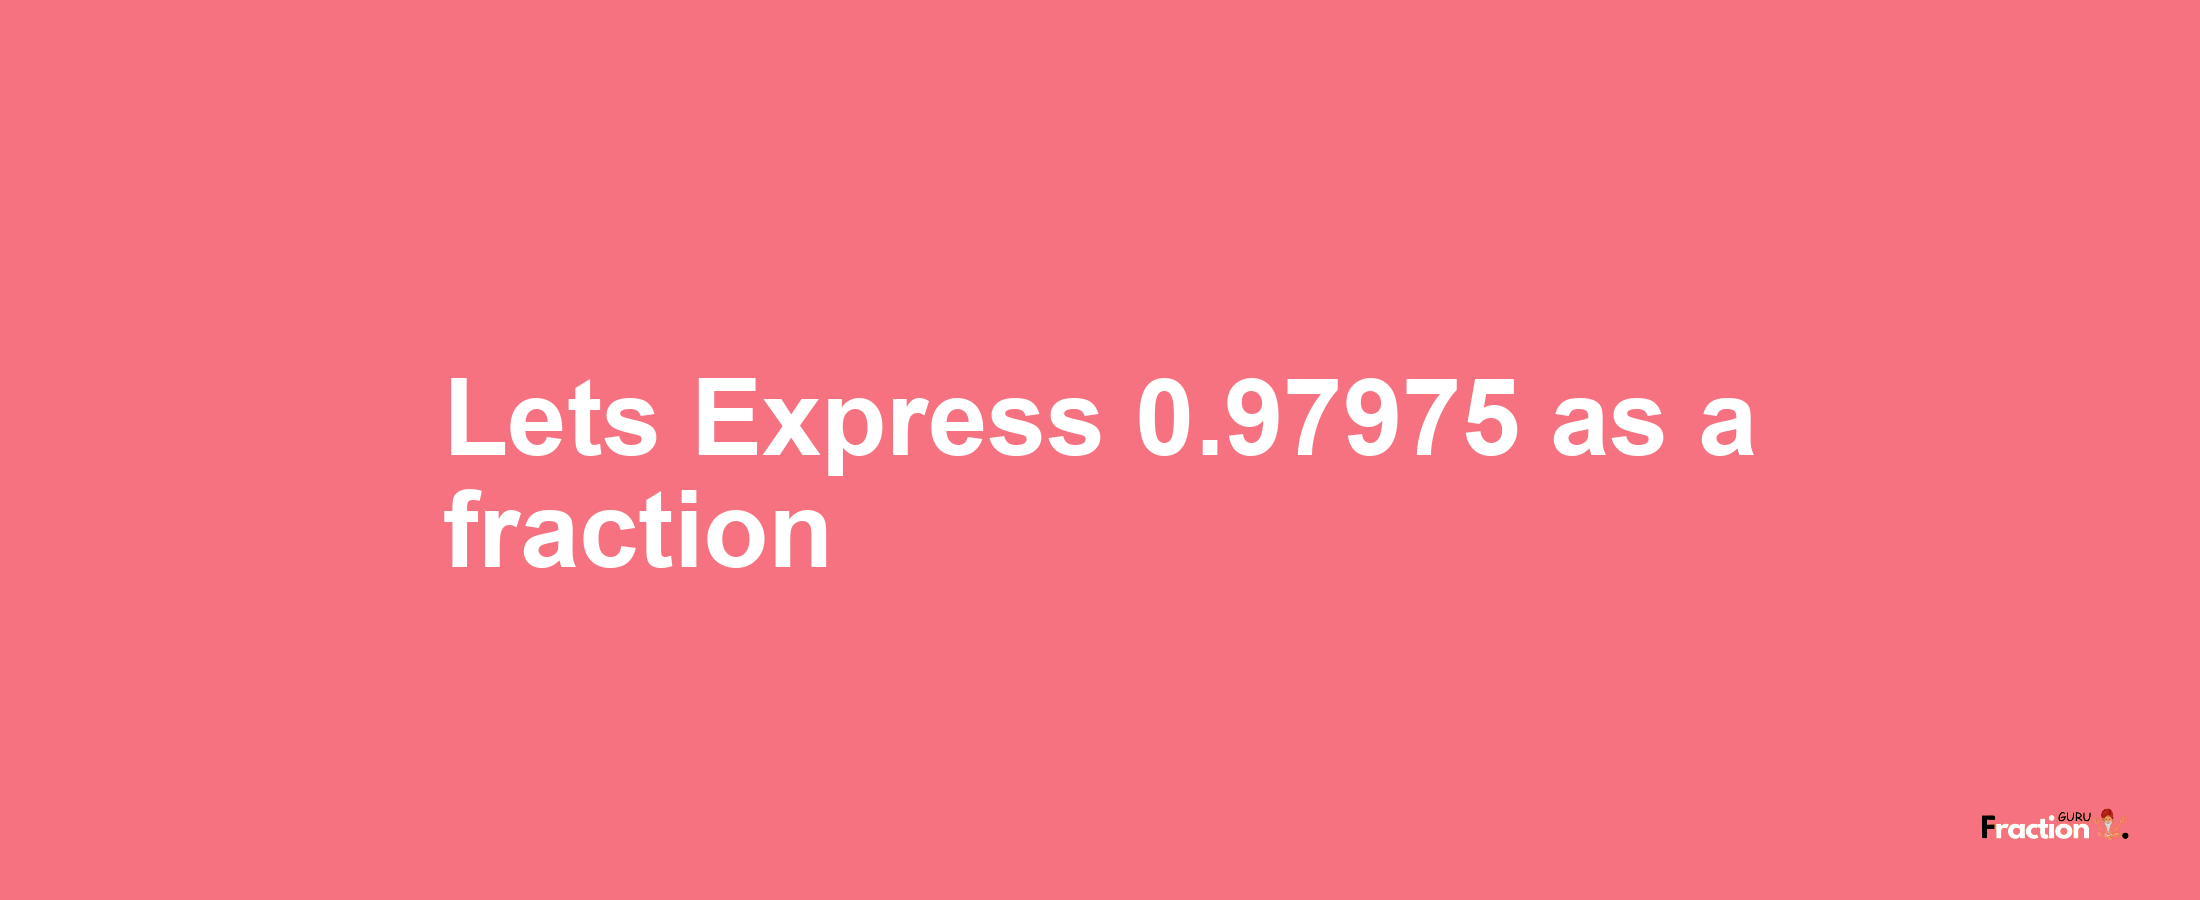 Lets Express 0.97975 as afraction